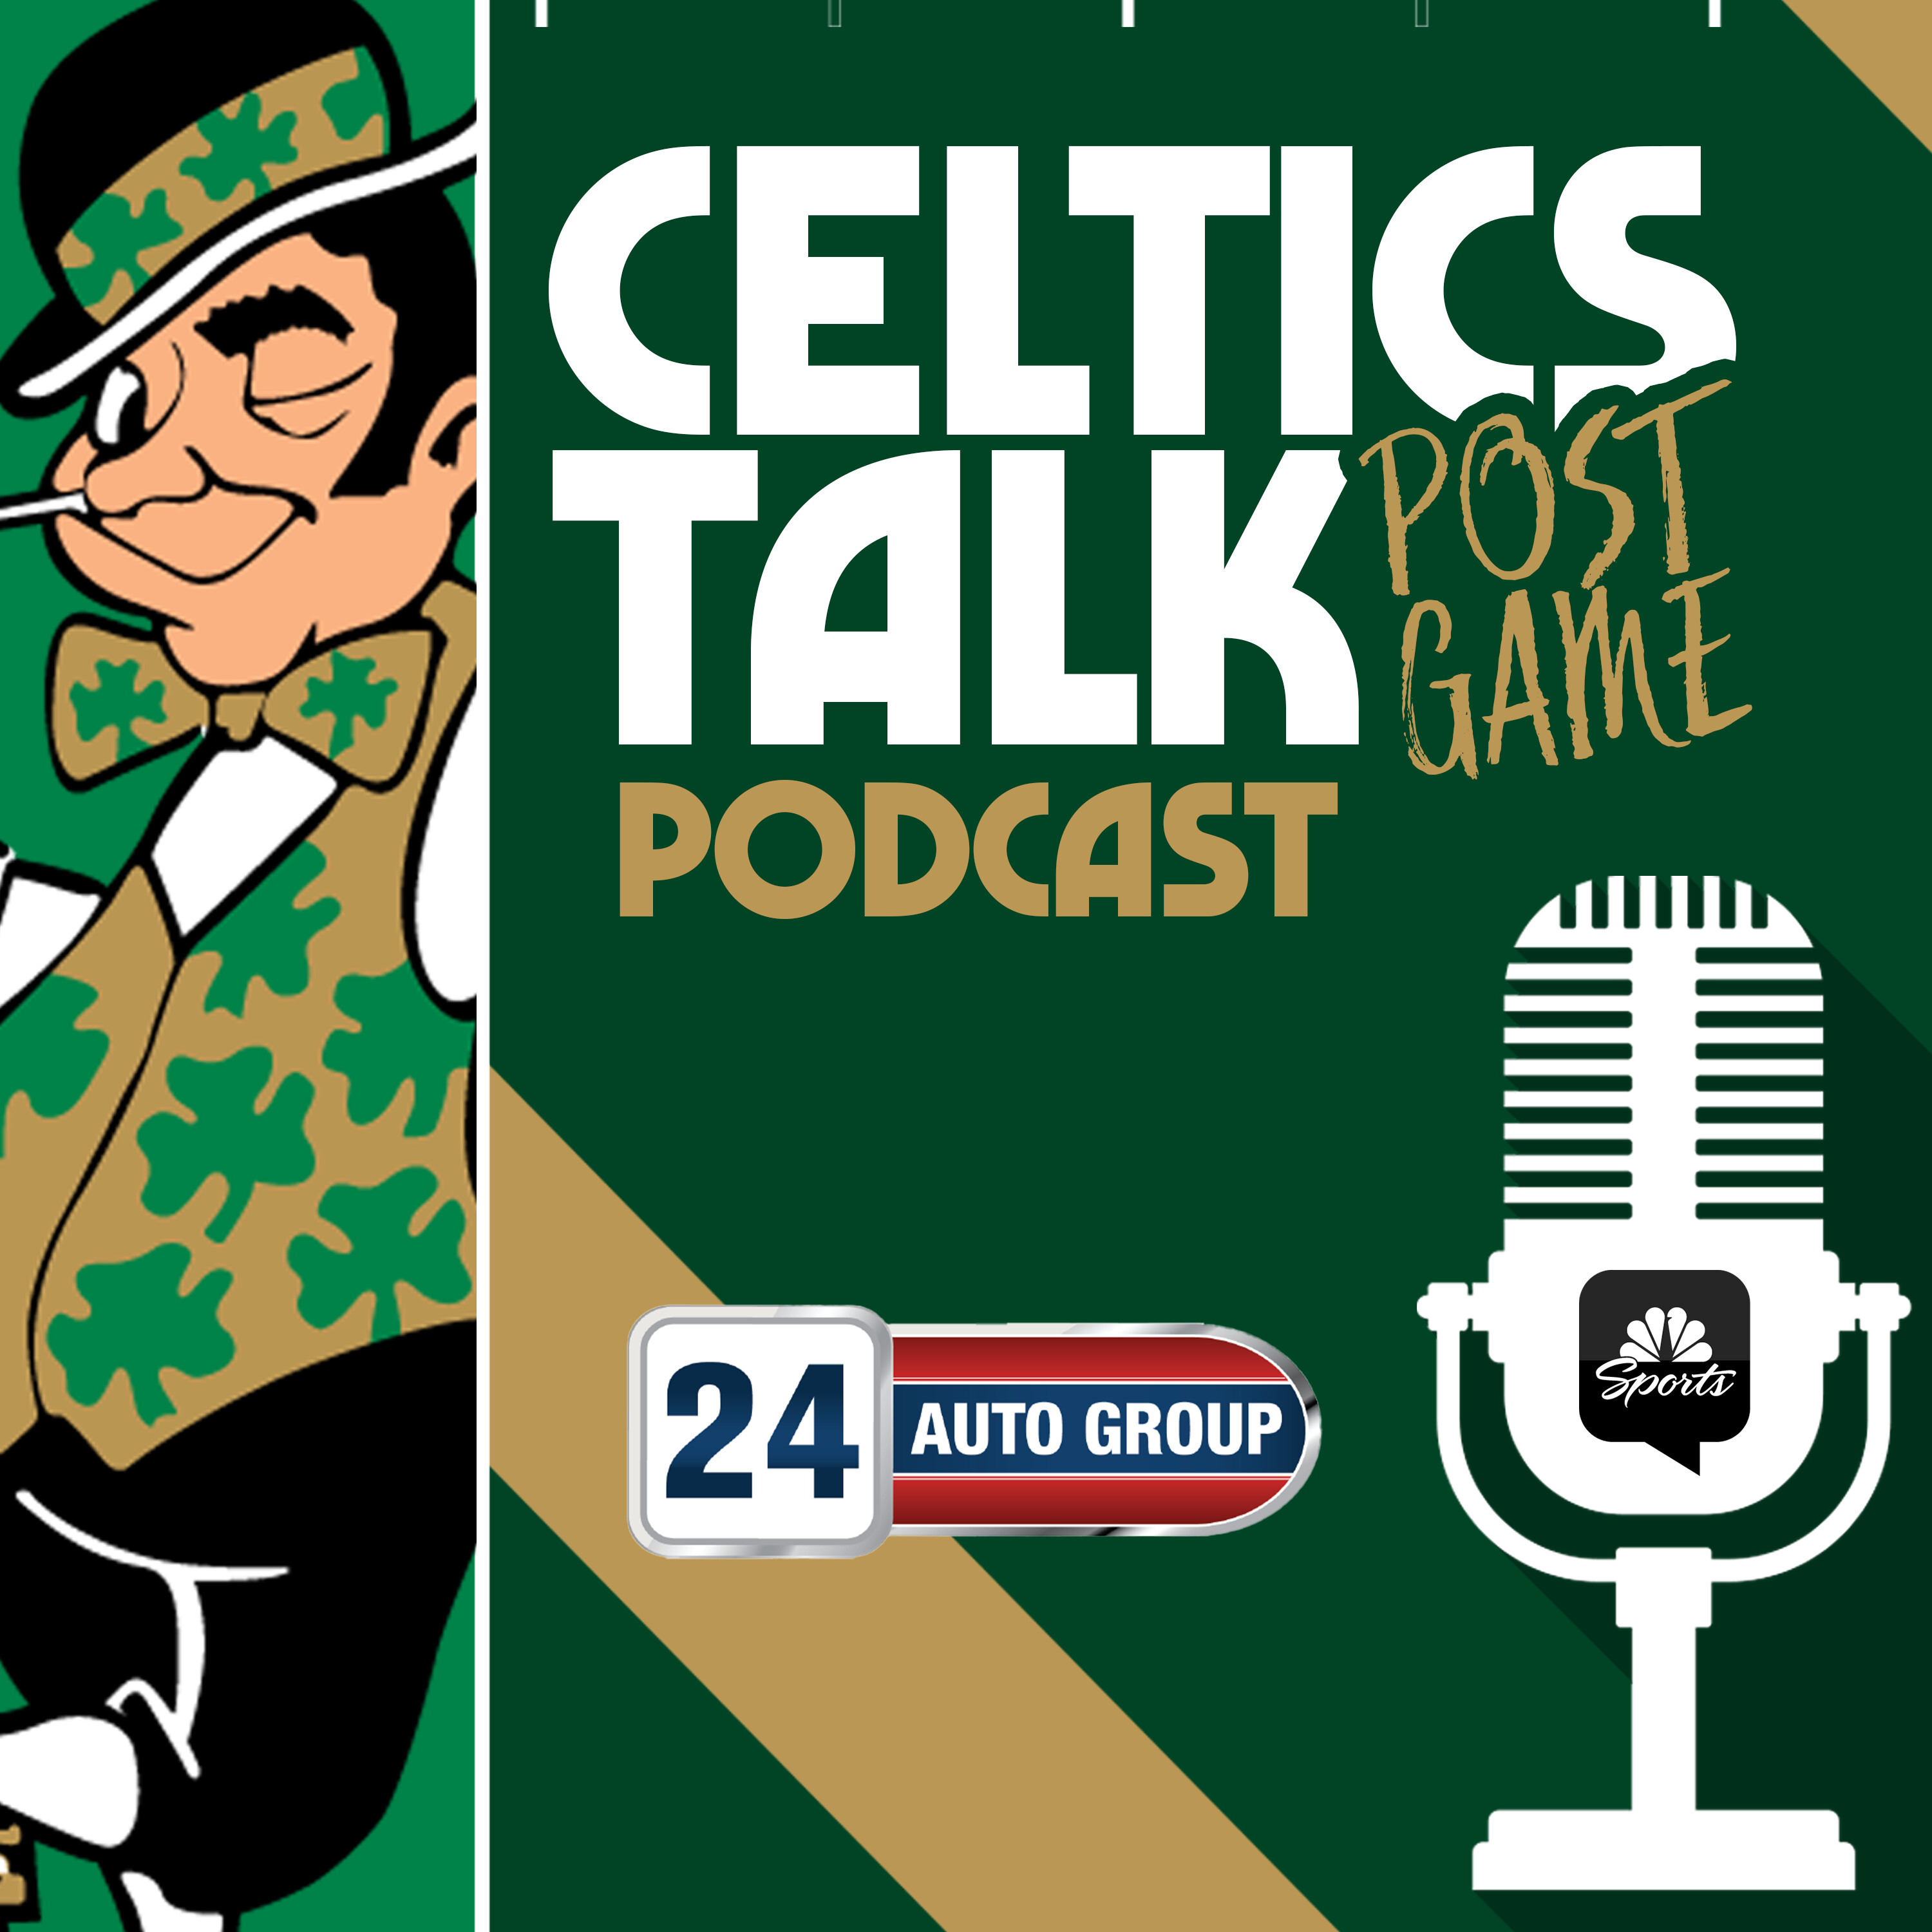 POSTGAME POD: Celtics use historic shooting night to blow out the Hornets